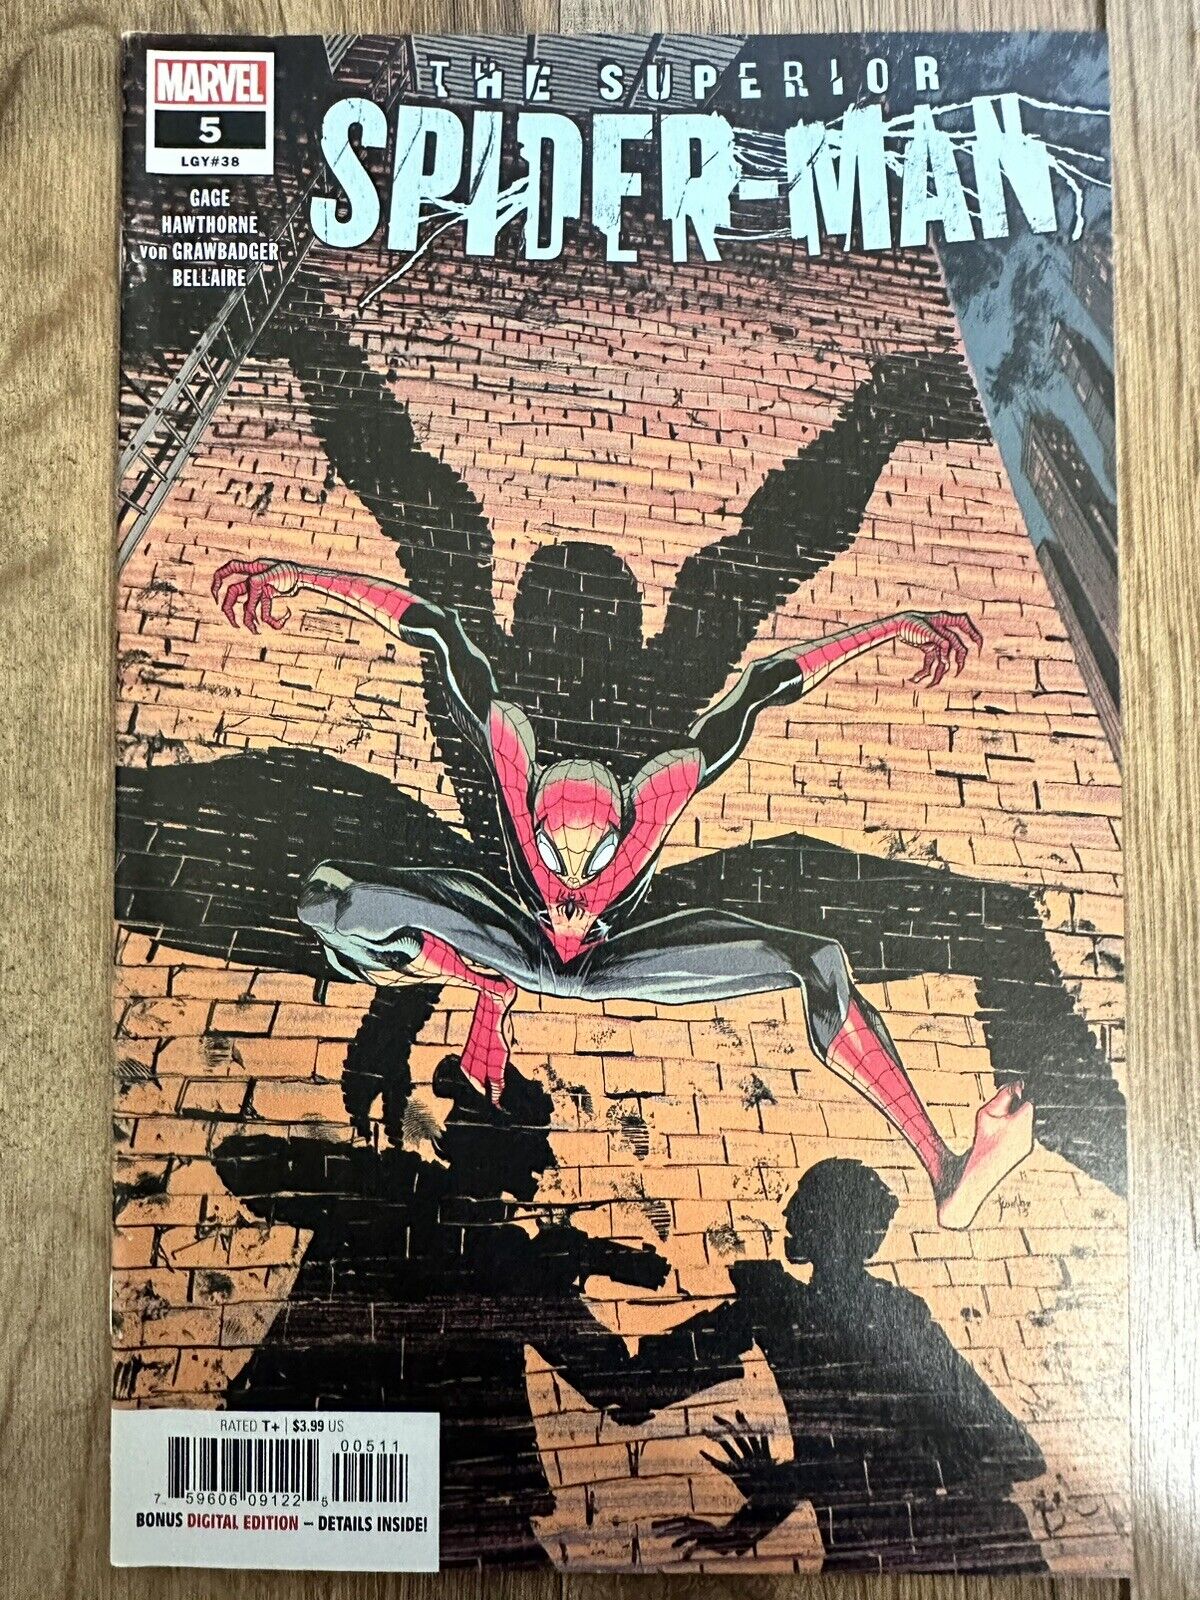 SUPERIOR SPIDER-MAN #5 (2019) NM - CHAREST COVER A - FIRST PRINT {H7}